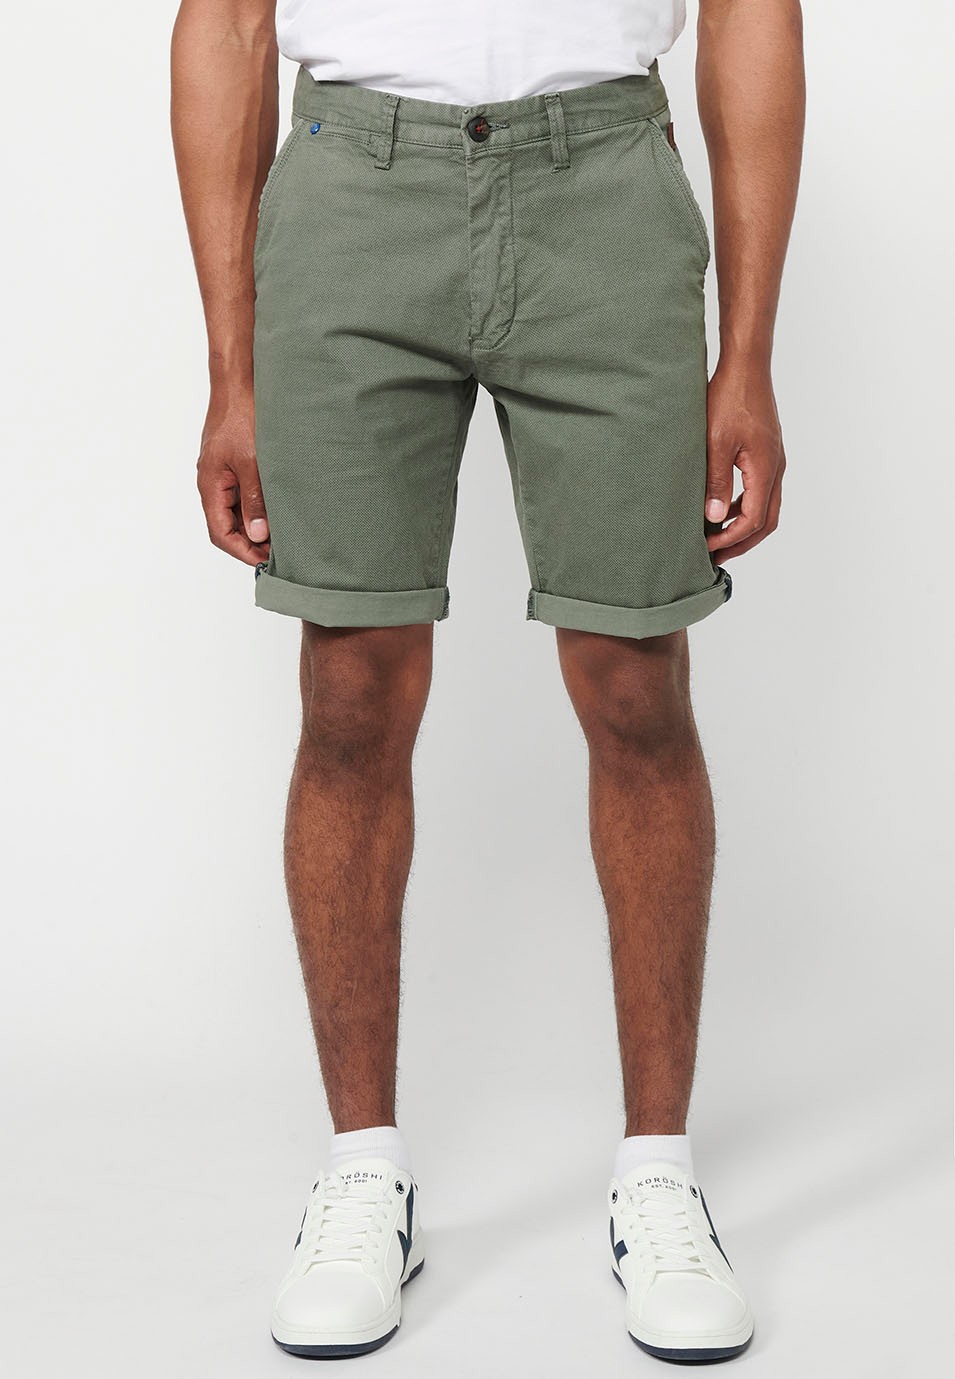 Bermuda Chino Shorts with Turn-Up Finish with Front Zipper and Button Closure with Four Pockets in Green Color for Men 2